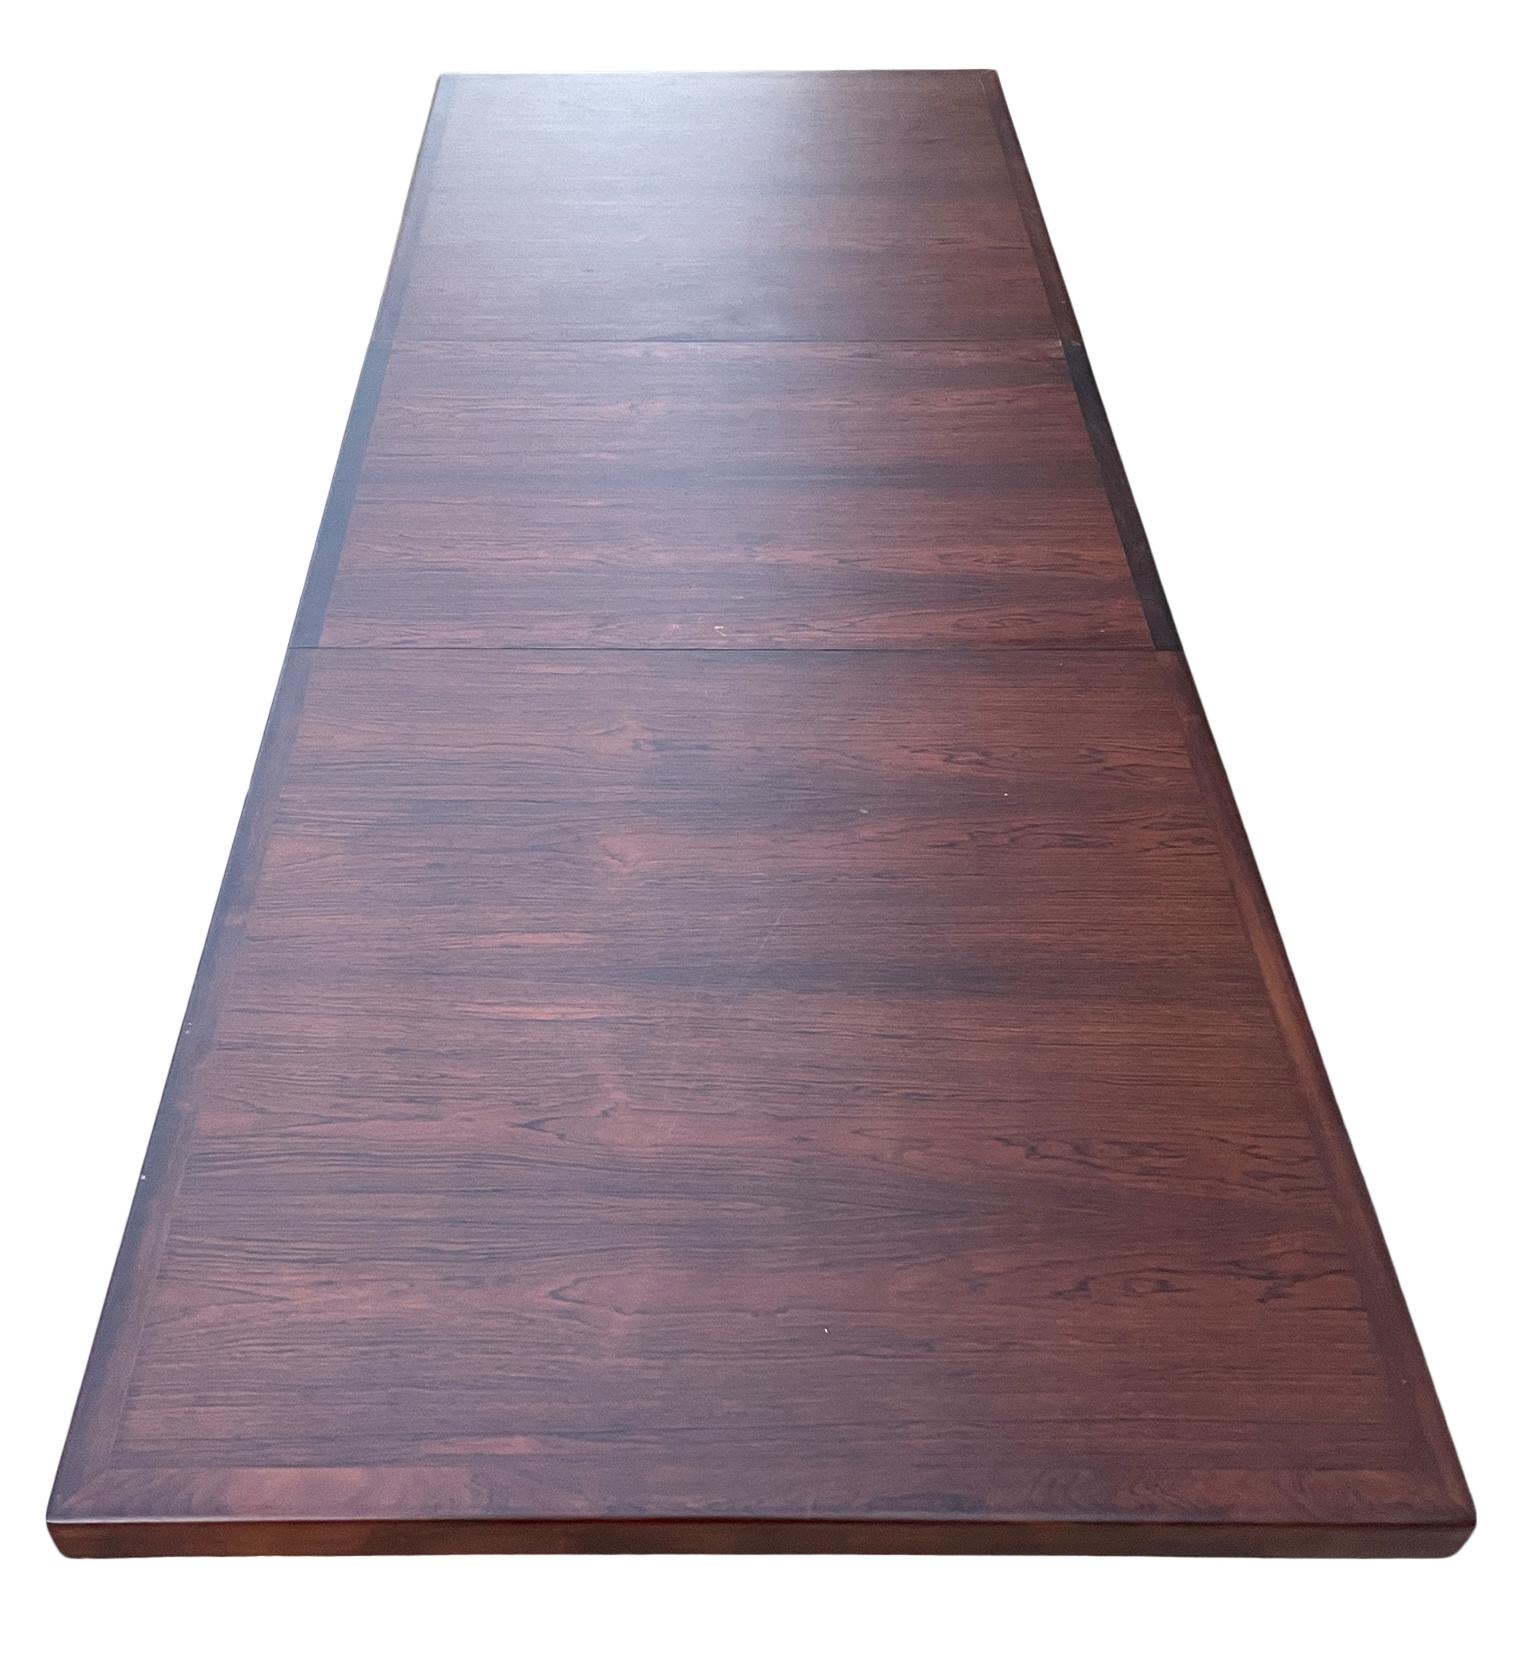 Midcentury Rare Solid minimalist Rosewood Expandable Dining Table with 1 Leaf For Sale 5